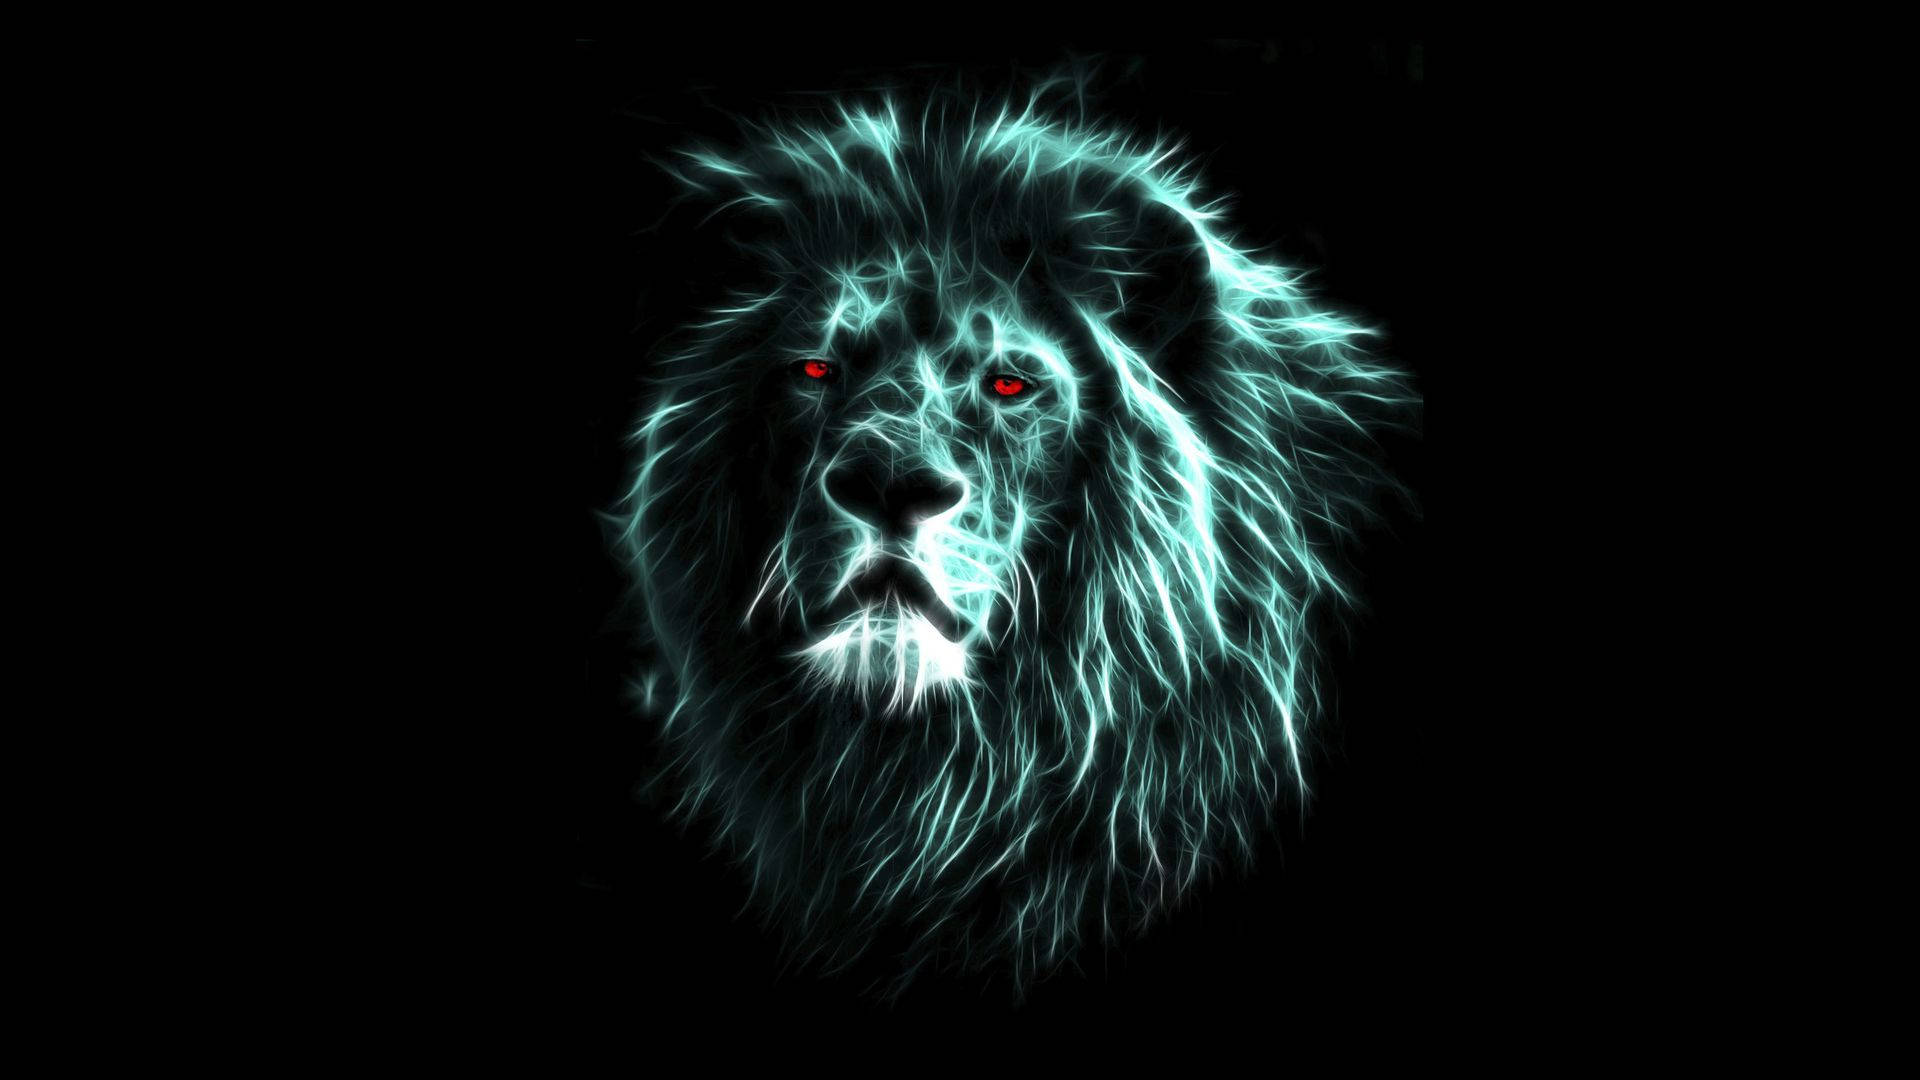 Majestic Red-eyed Lion Head In Darkness Background